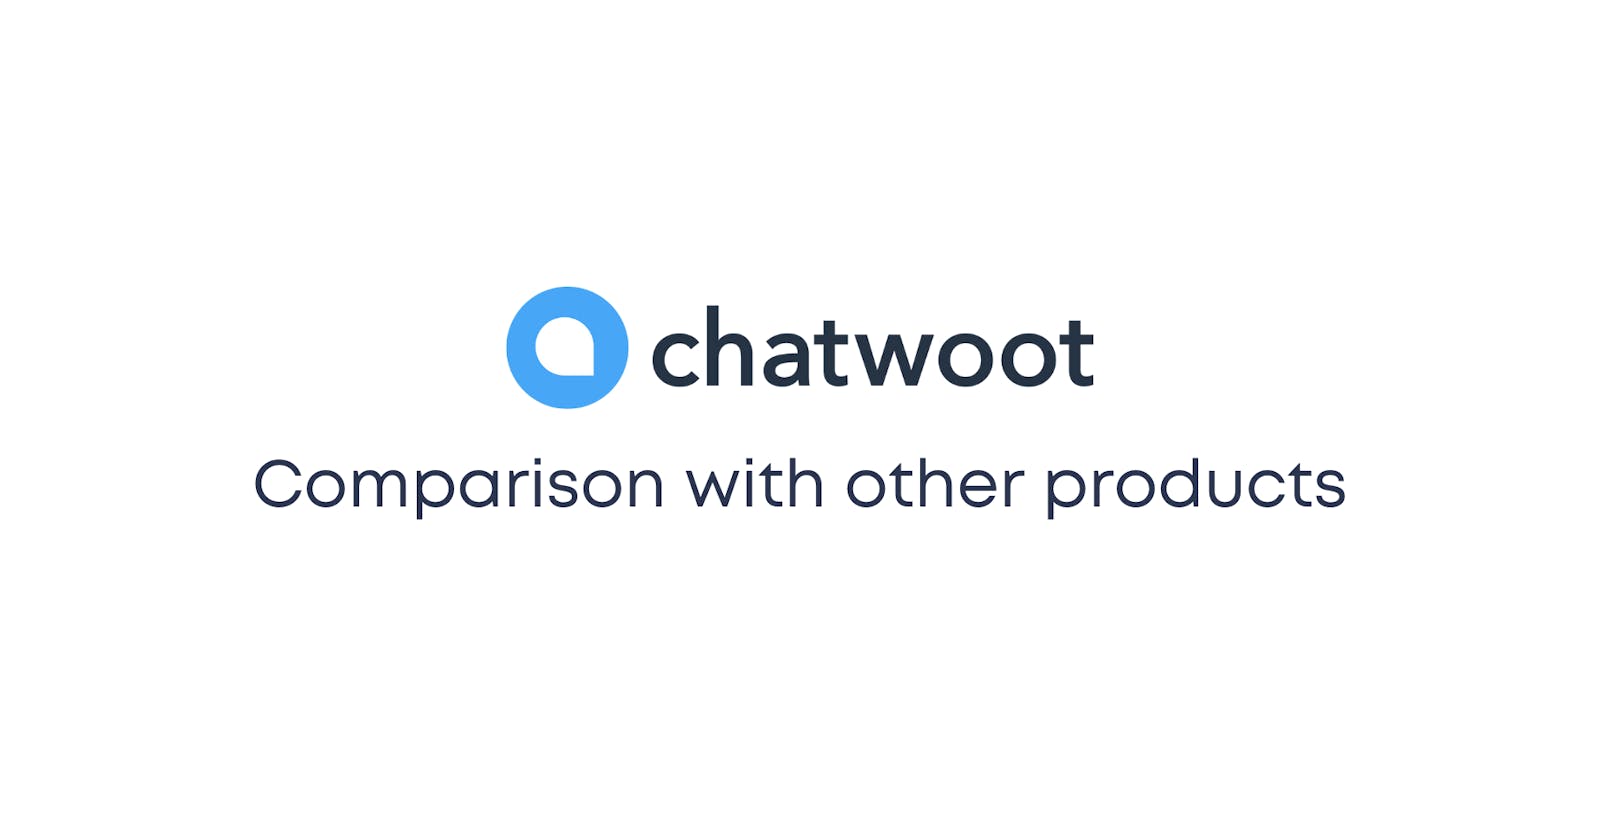 10+ Live chat tools like Intercom, Drift, Zendesk, Tawk.io and LiveChat compared with Chatwoot.